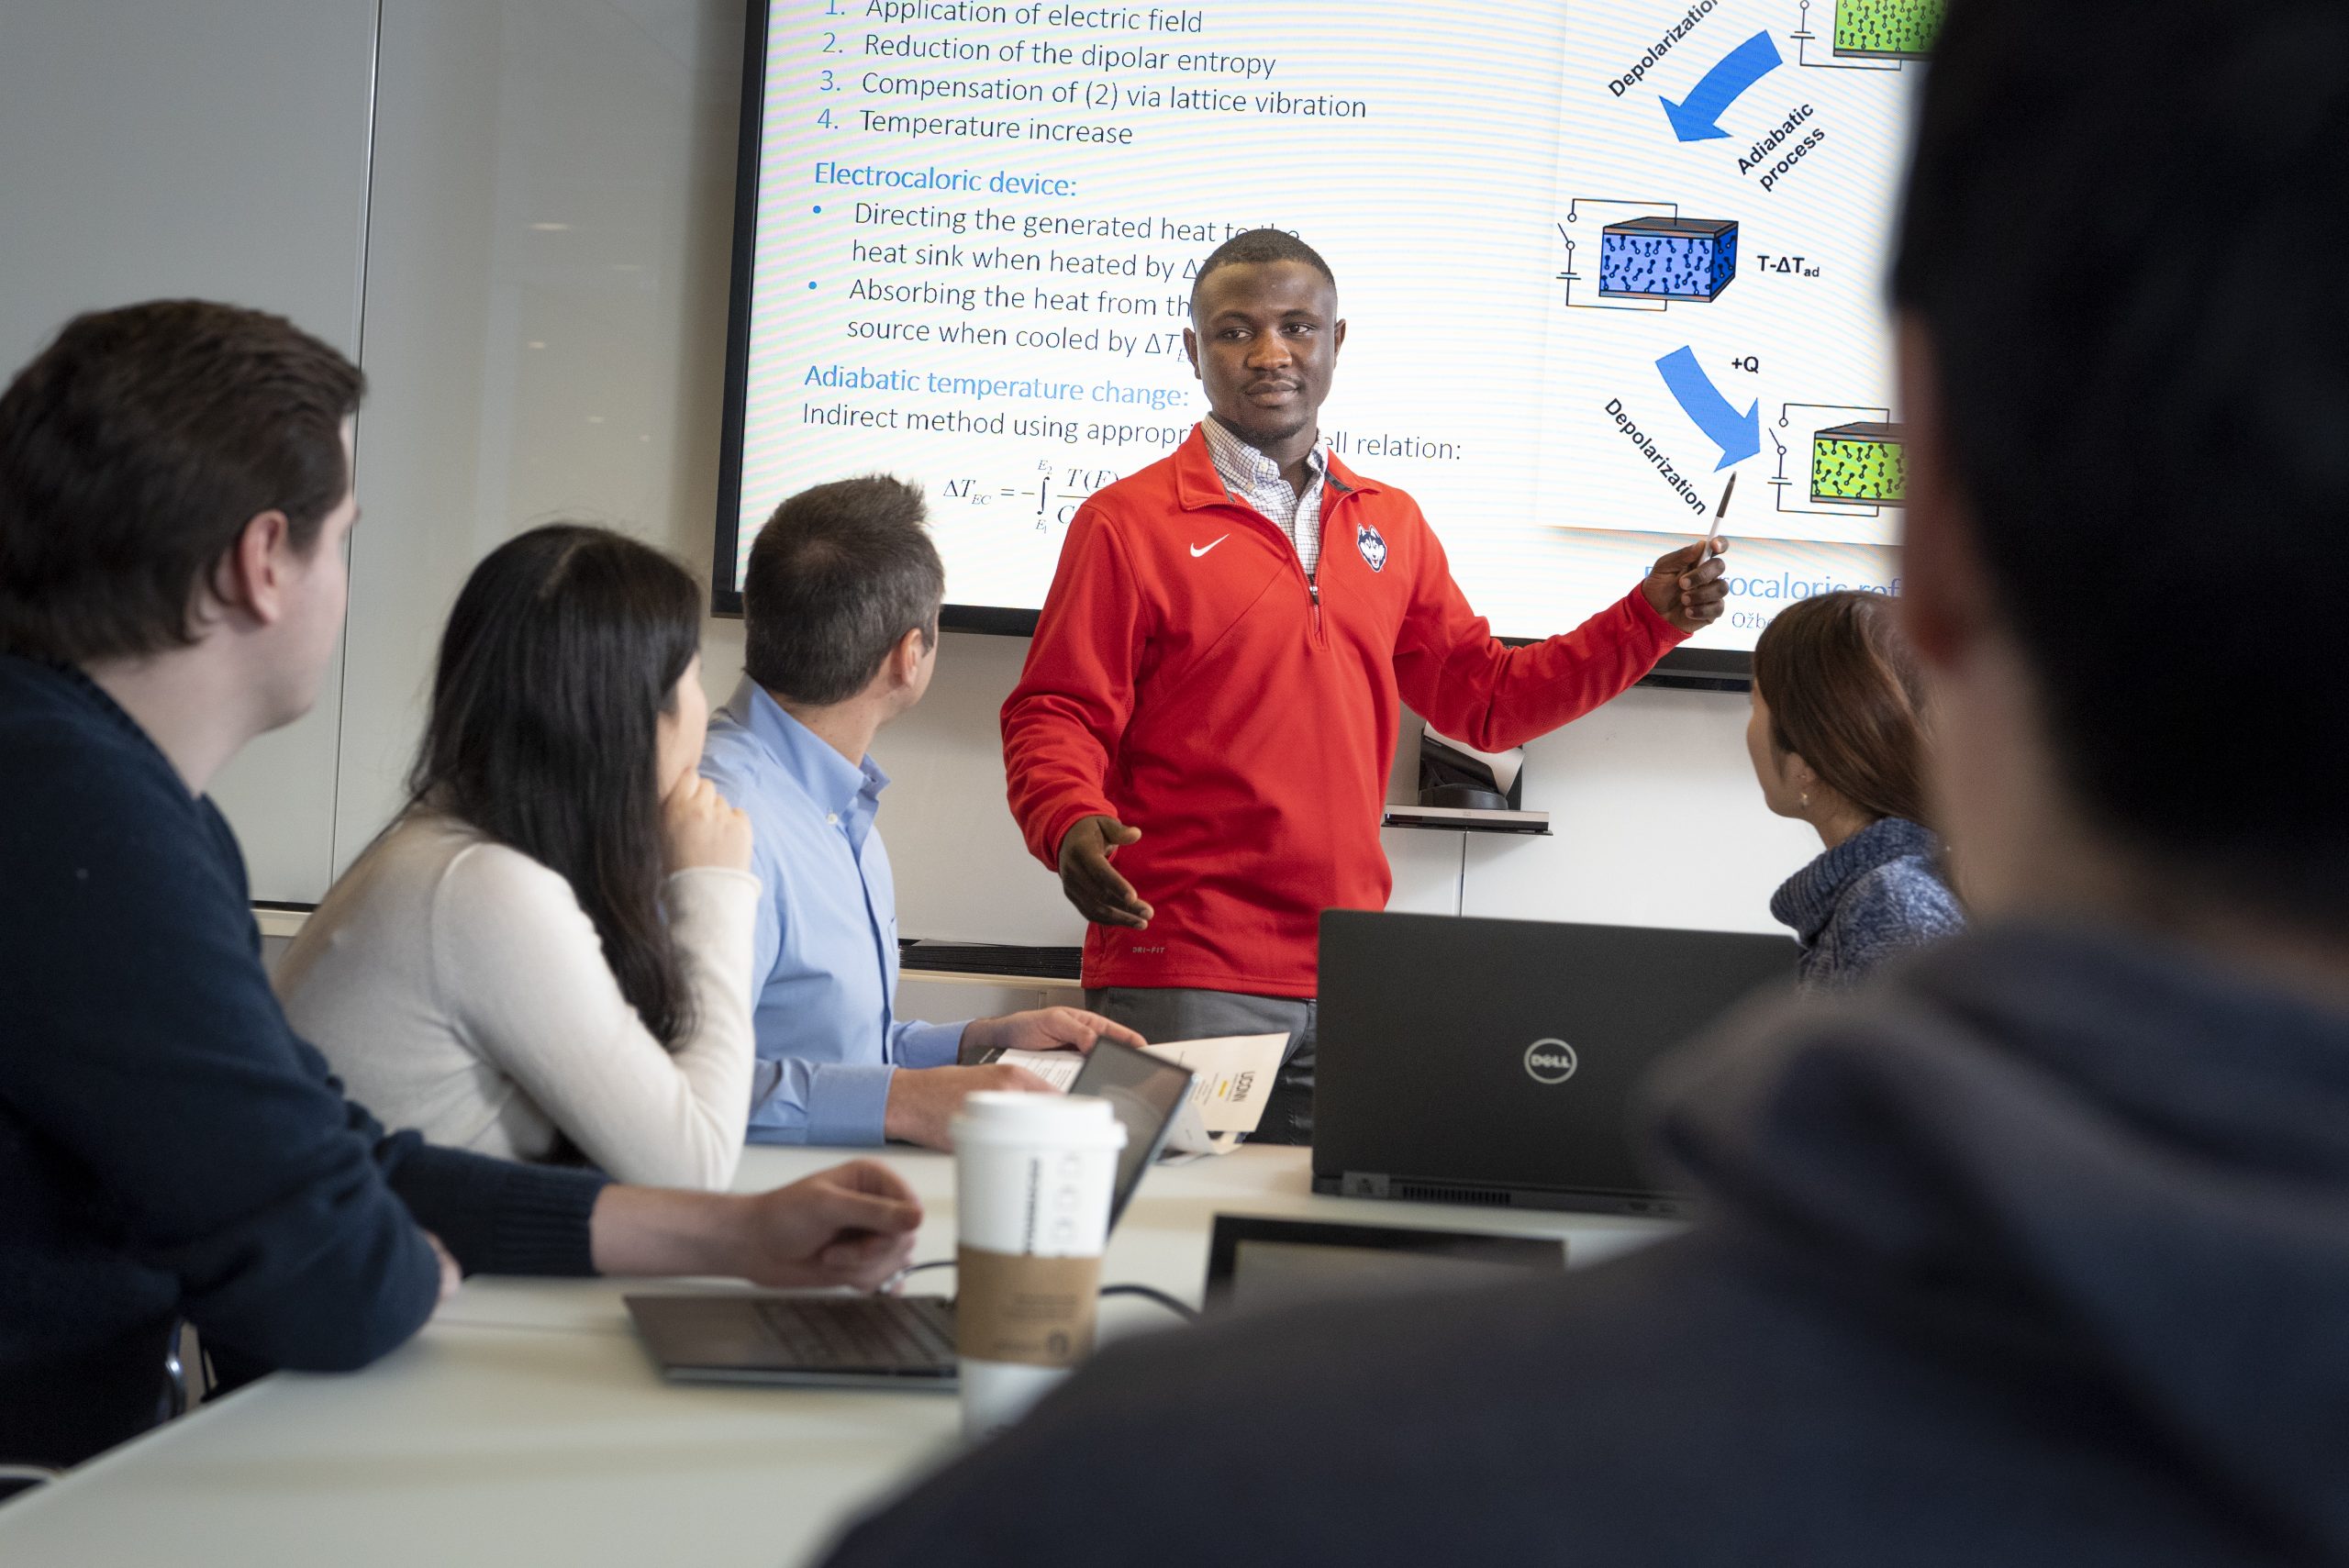 A Black male wearing a red pullover featuring the UConn Husky dog logo points with a pen to a scientific presentation on a screen behind him while presenting to a group of males and females who are all facing him.